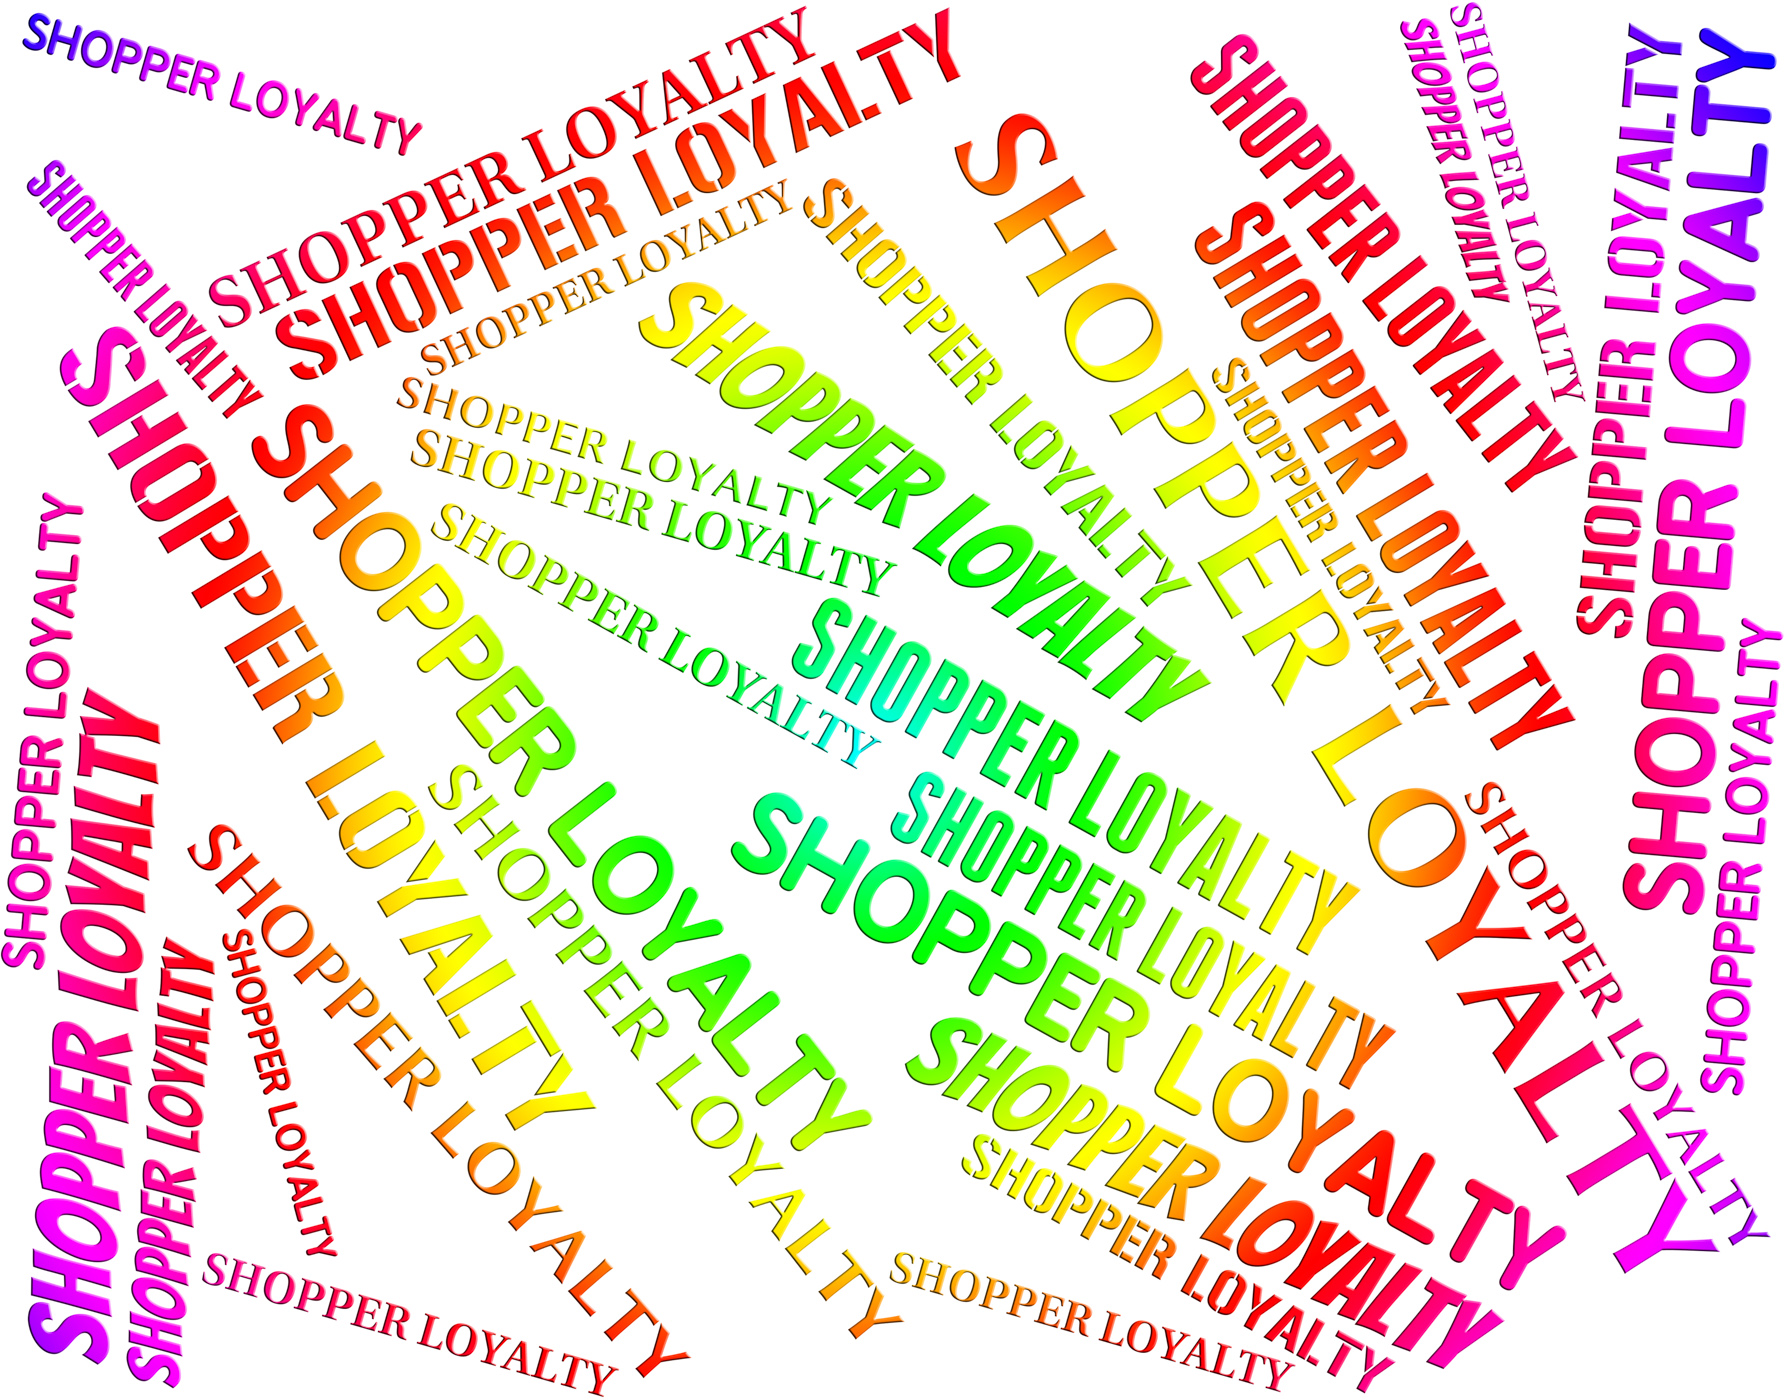 Shopper loyalty shows clients clientele and support photo